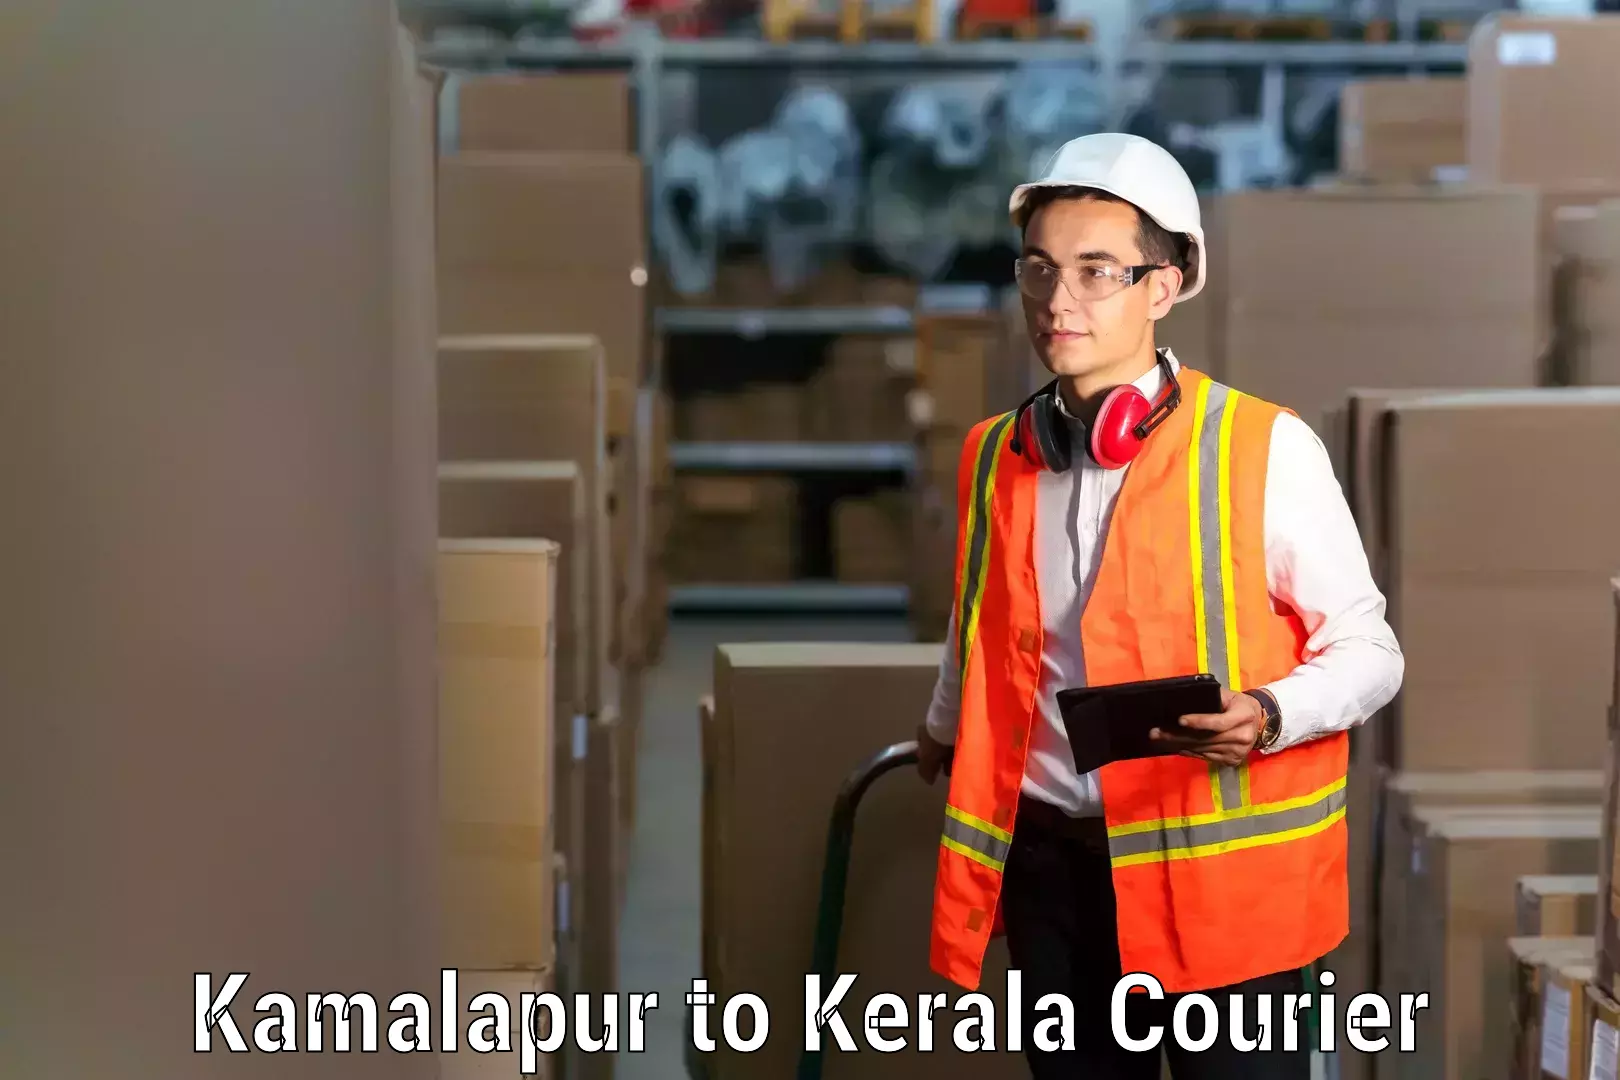 Furniture delivery service Kamalapur to Palai